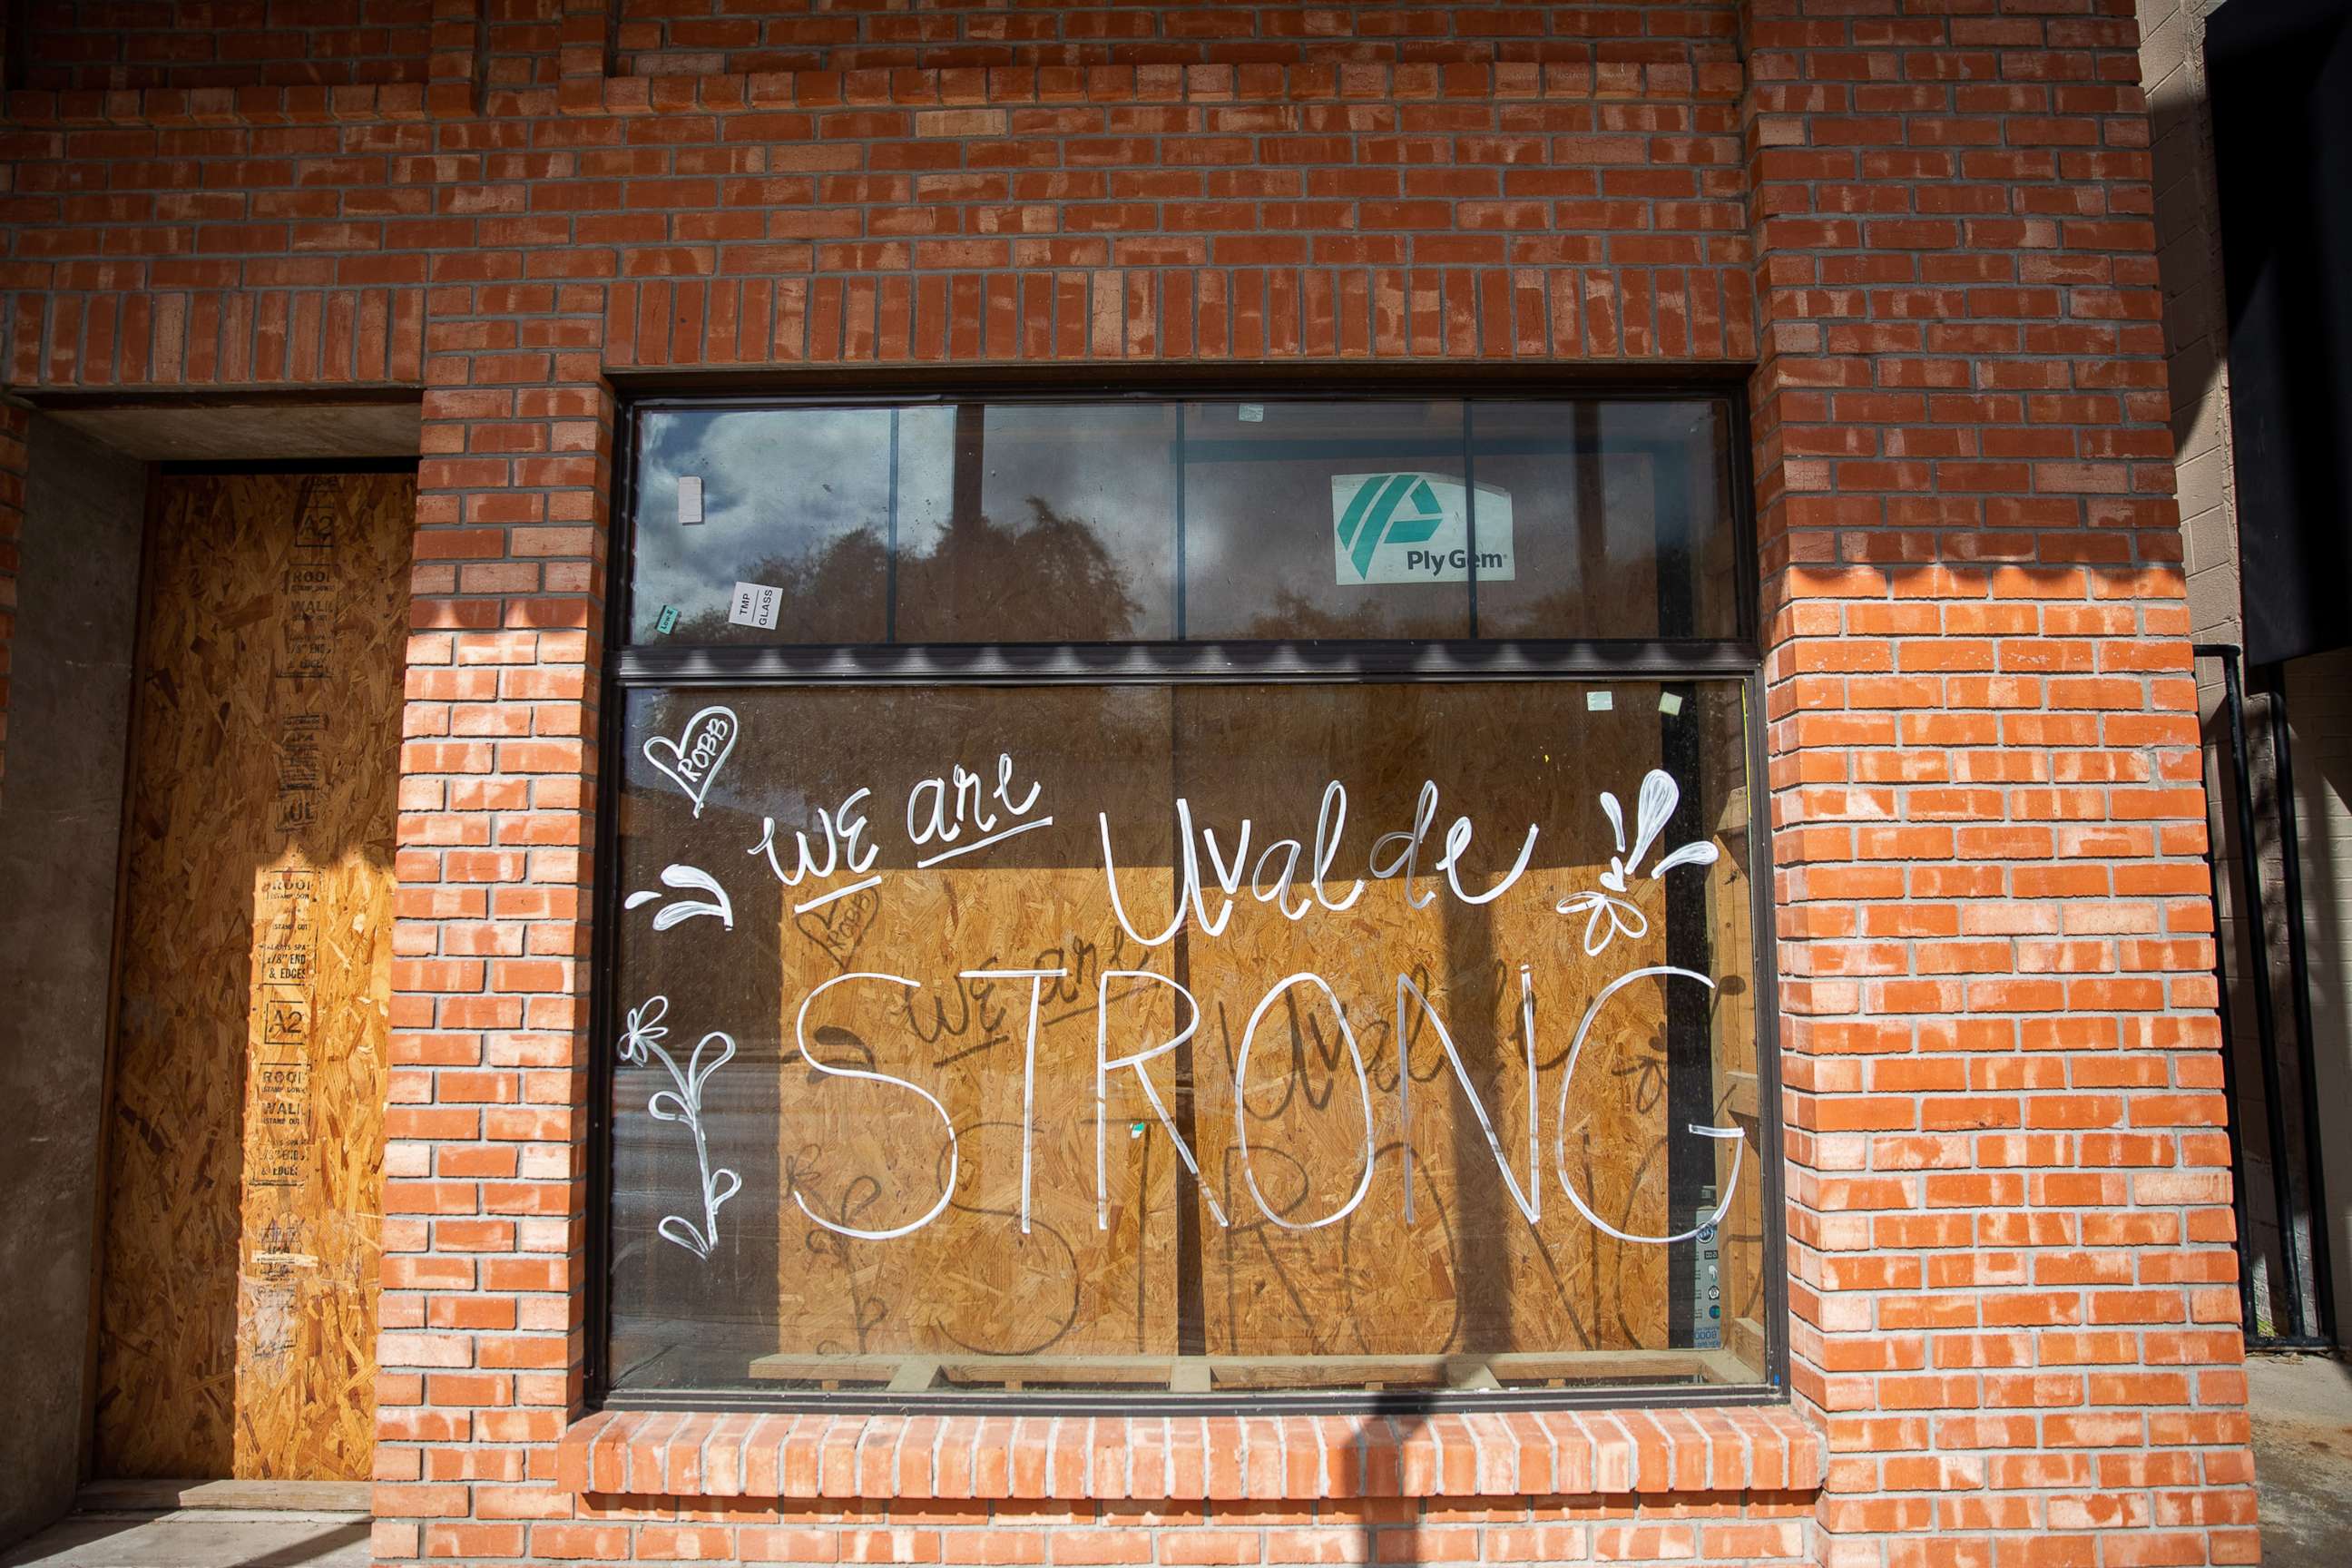 PHOTO: "Uvalde Strong" is seen written on the window of a building in downtown Uvalde, Texas, on Aug. 21, 2022.